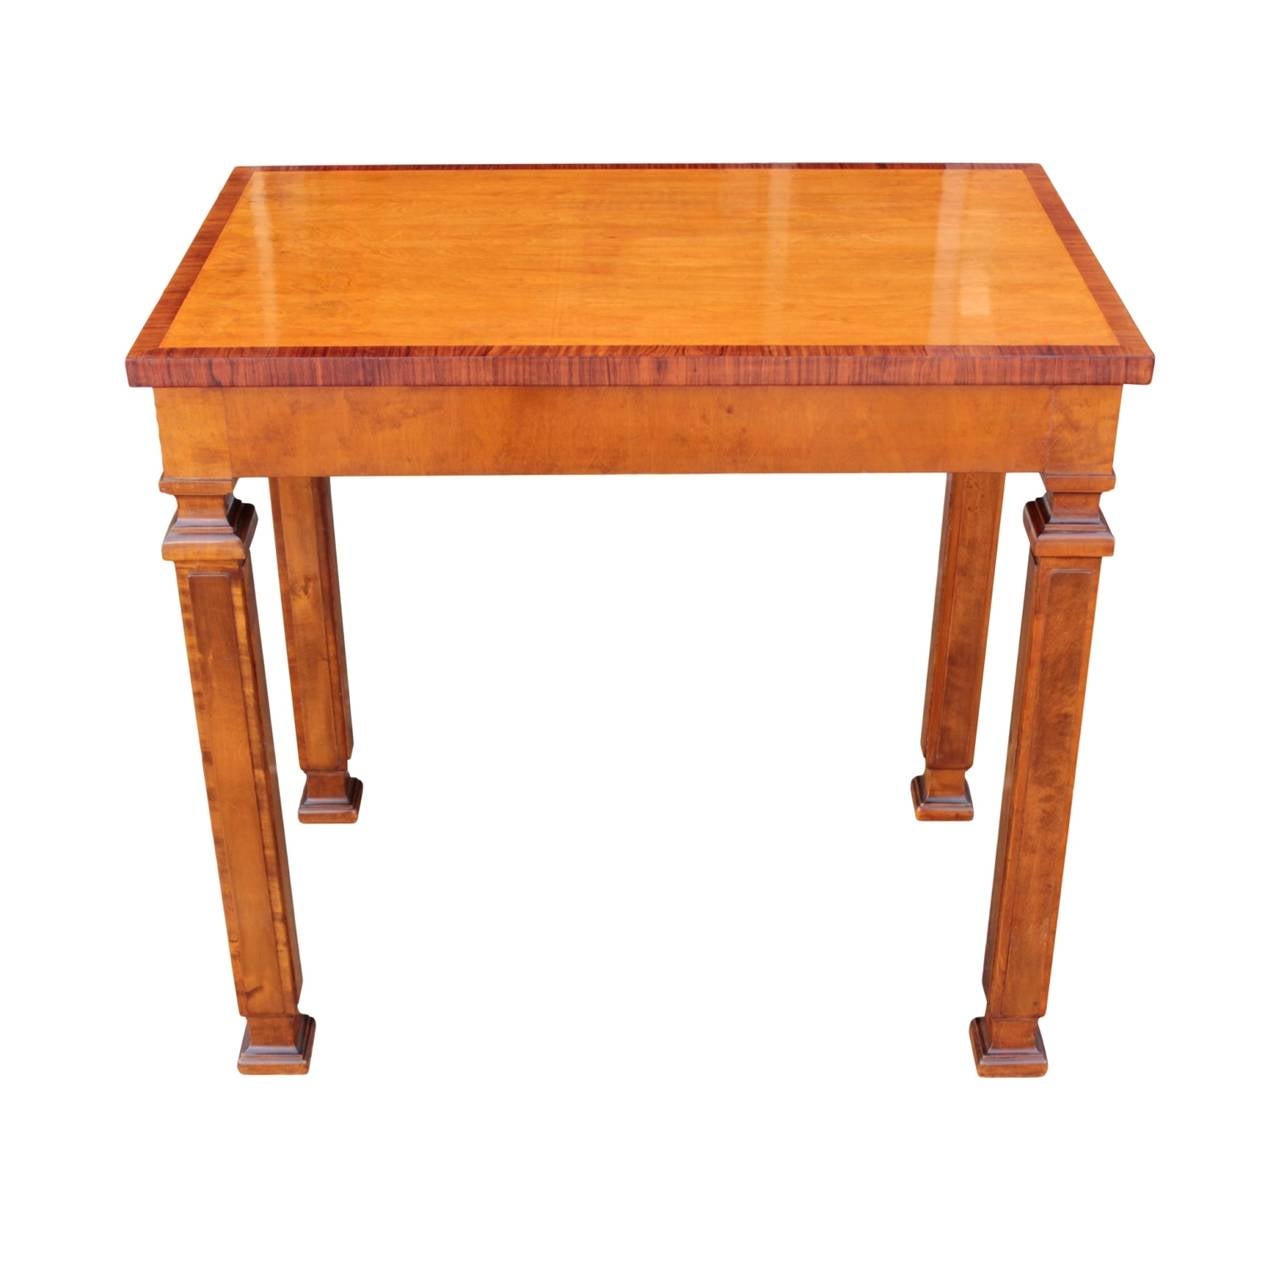 Well sized Swedish Grace rectangular console table having a top in birch with rosewood inlay banding raised on four architectural rectangular column legs with square shaped capitals and plinths and projecting corresponding fronts. In birch.